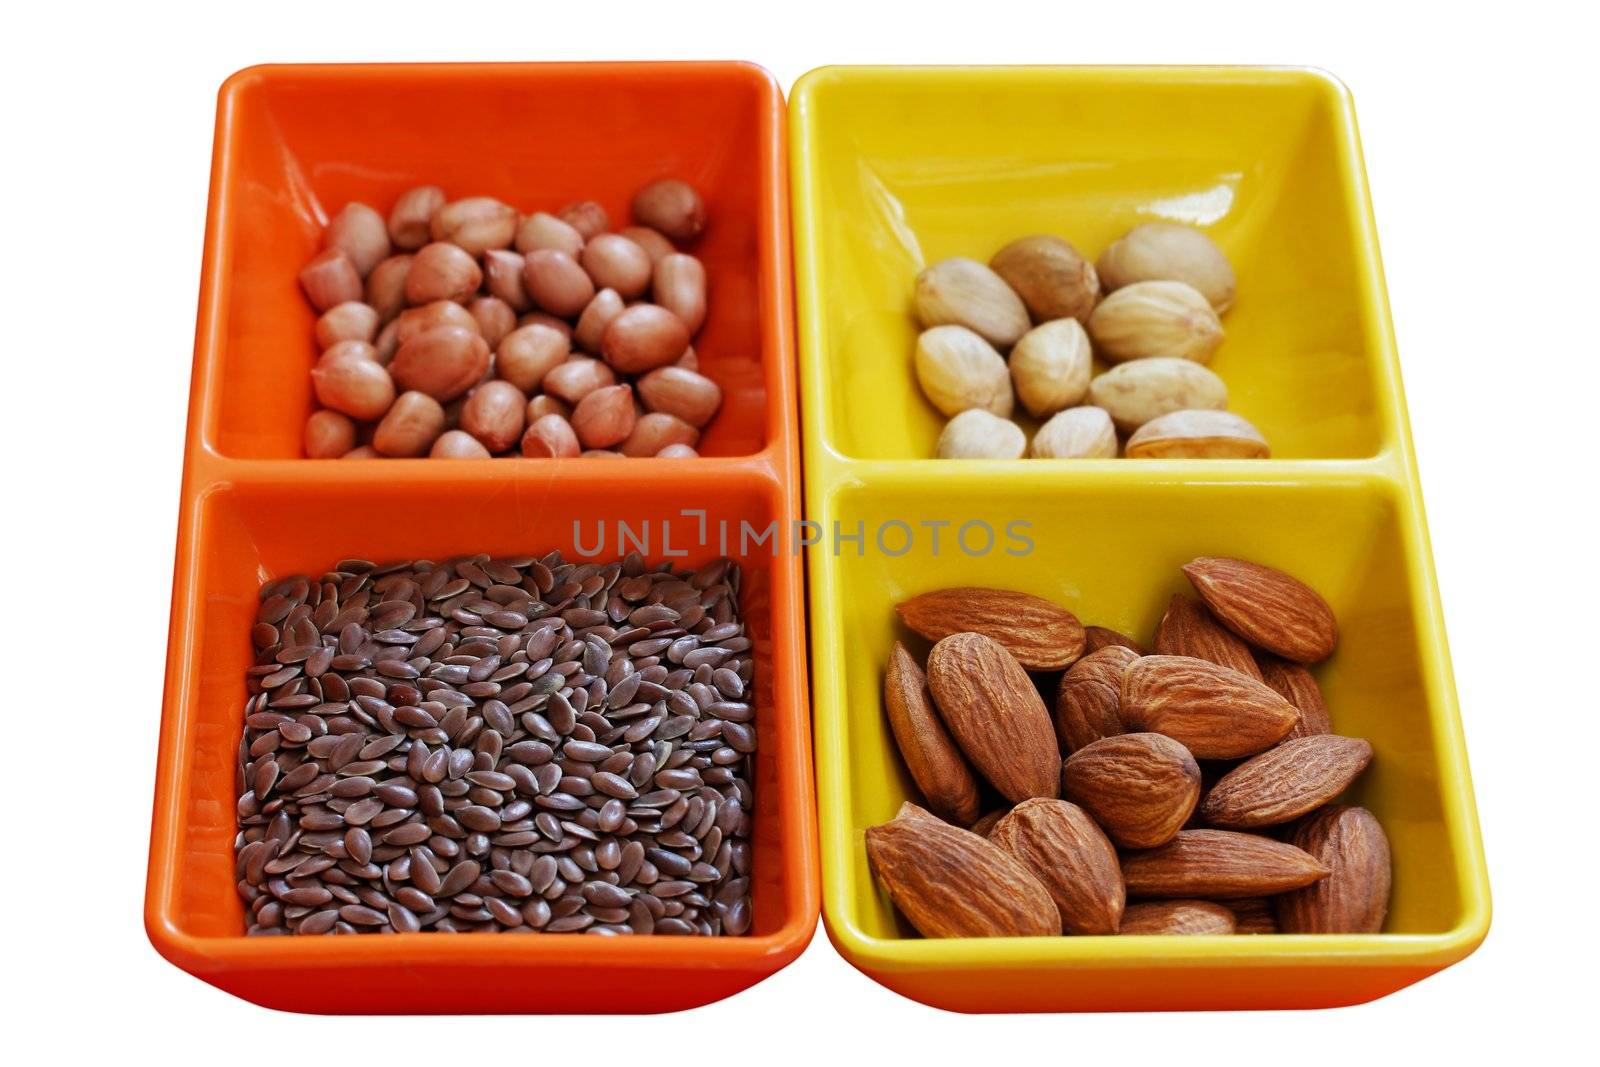 Dry seeds - almond, pistachio, peanut and flaxseed by mnsanthoshkumar